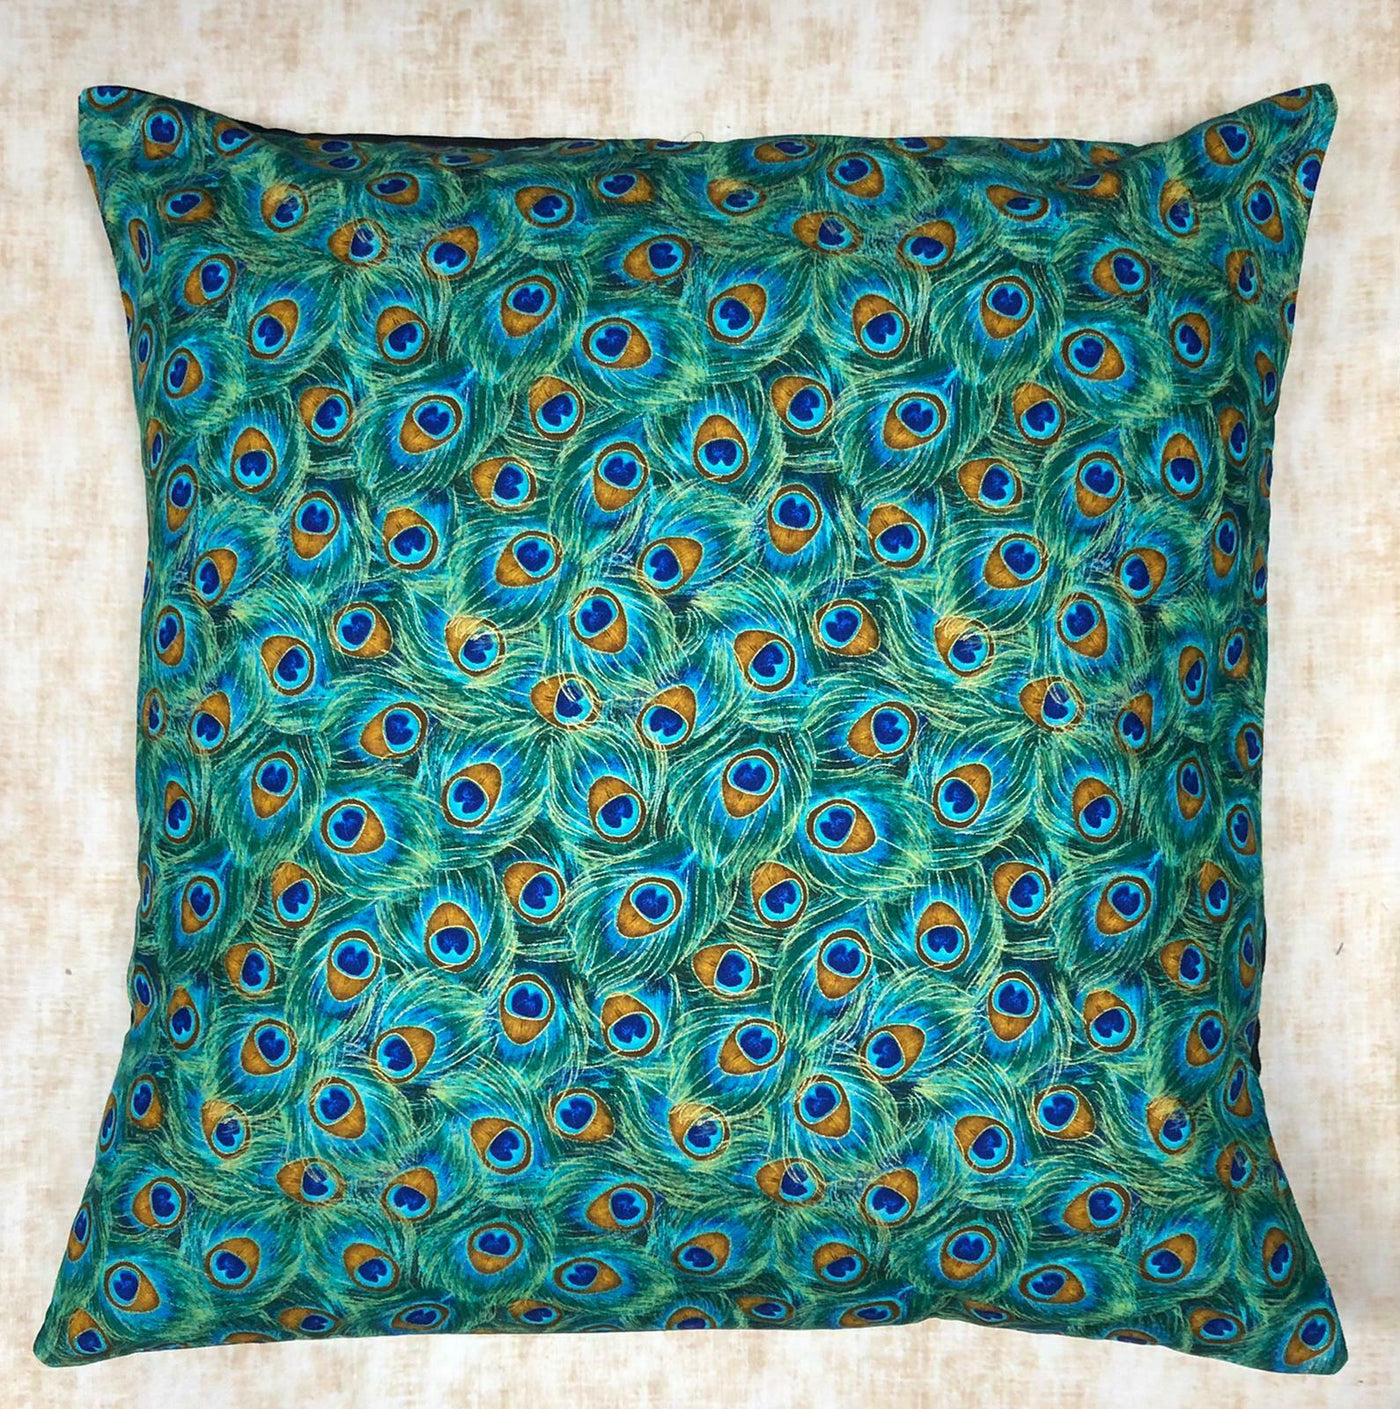 Peacock Eye Feather Designer Cushion Cover Case fits 18"x18" 100% Cotton